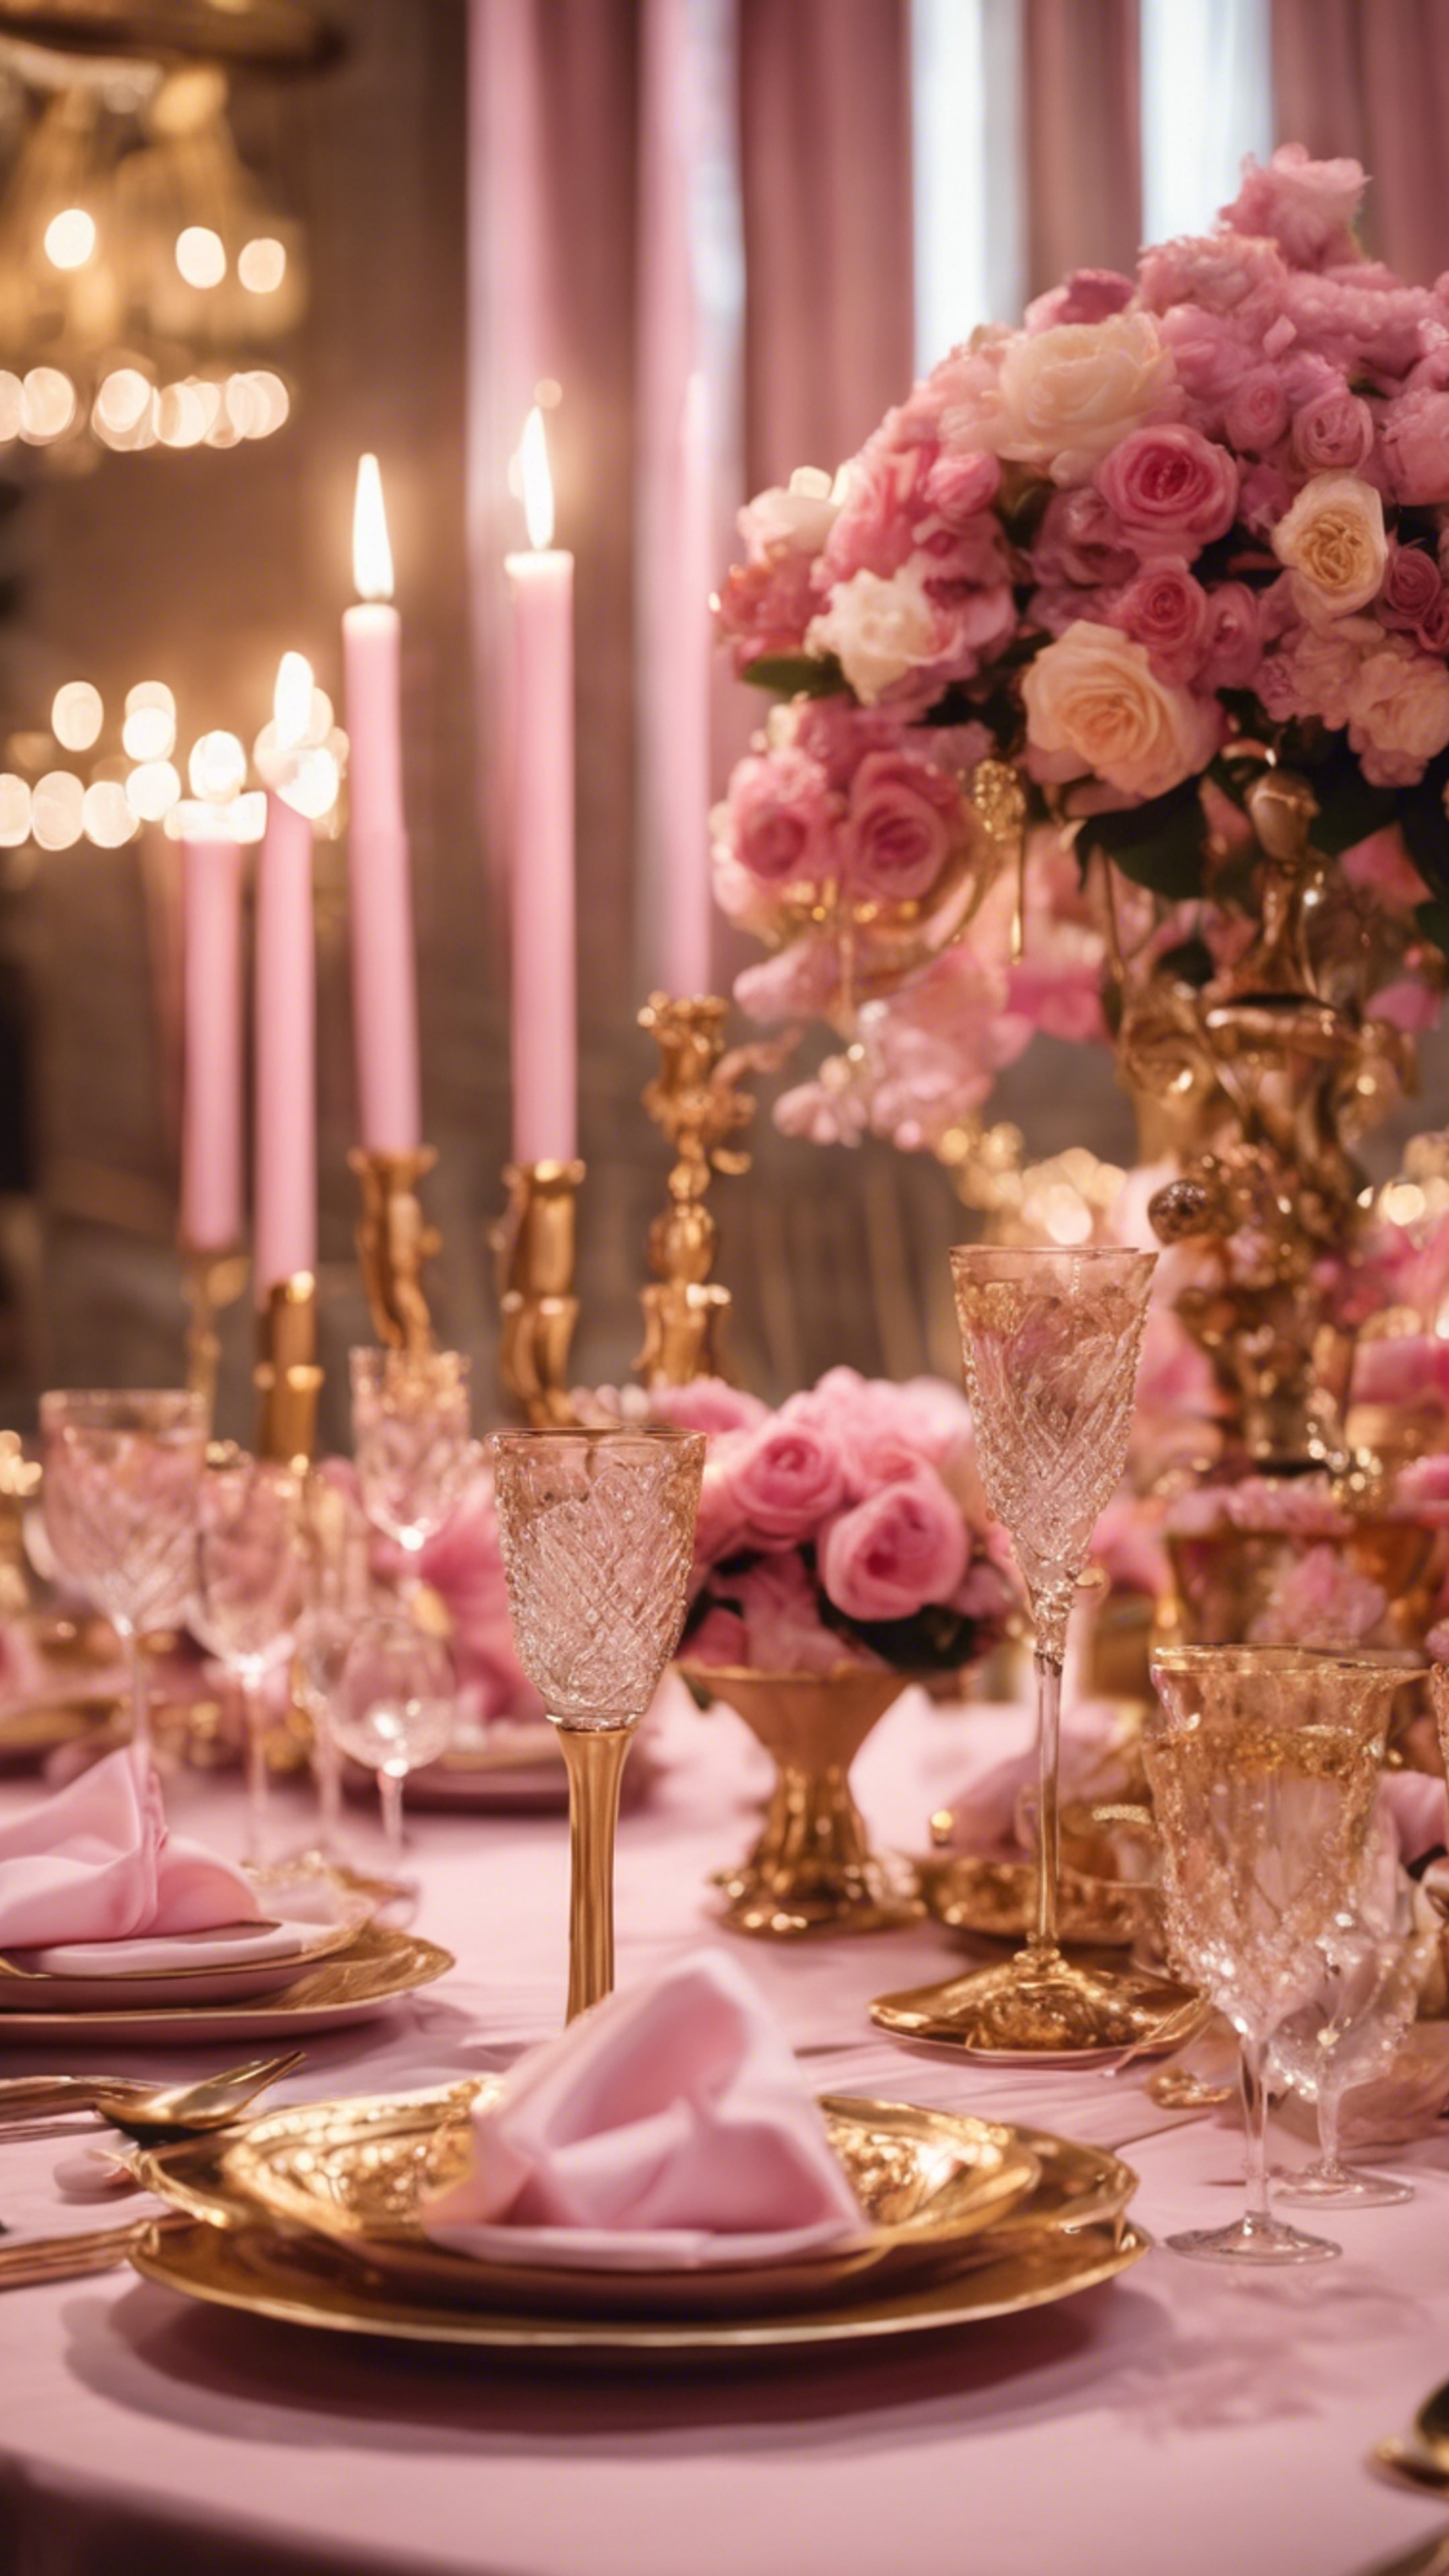 An elegant pink and gold-themed dining table set for an evening soiree.壁紙[a96f4c3be44f41948a30]